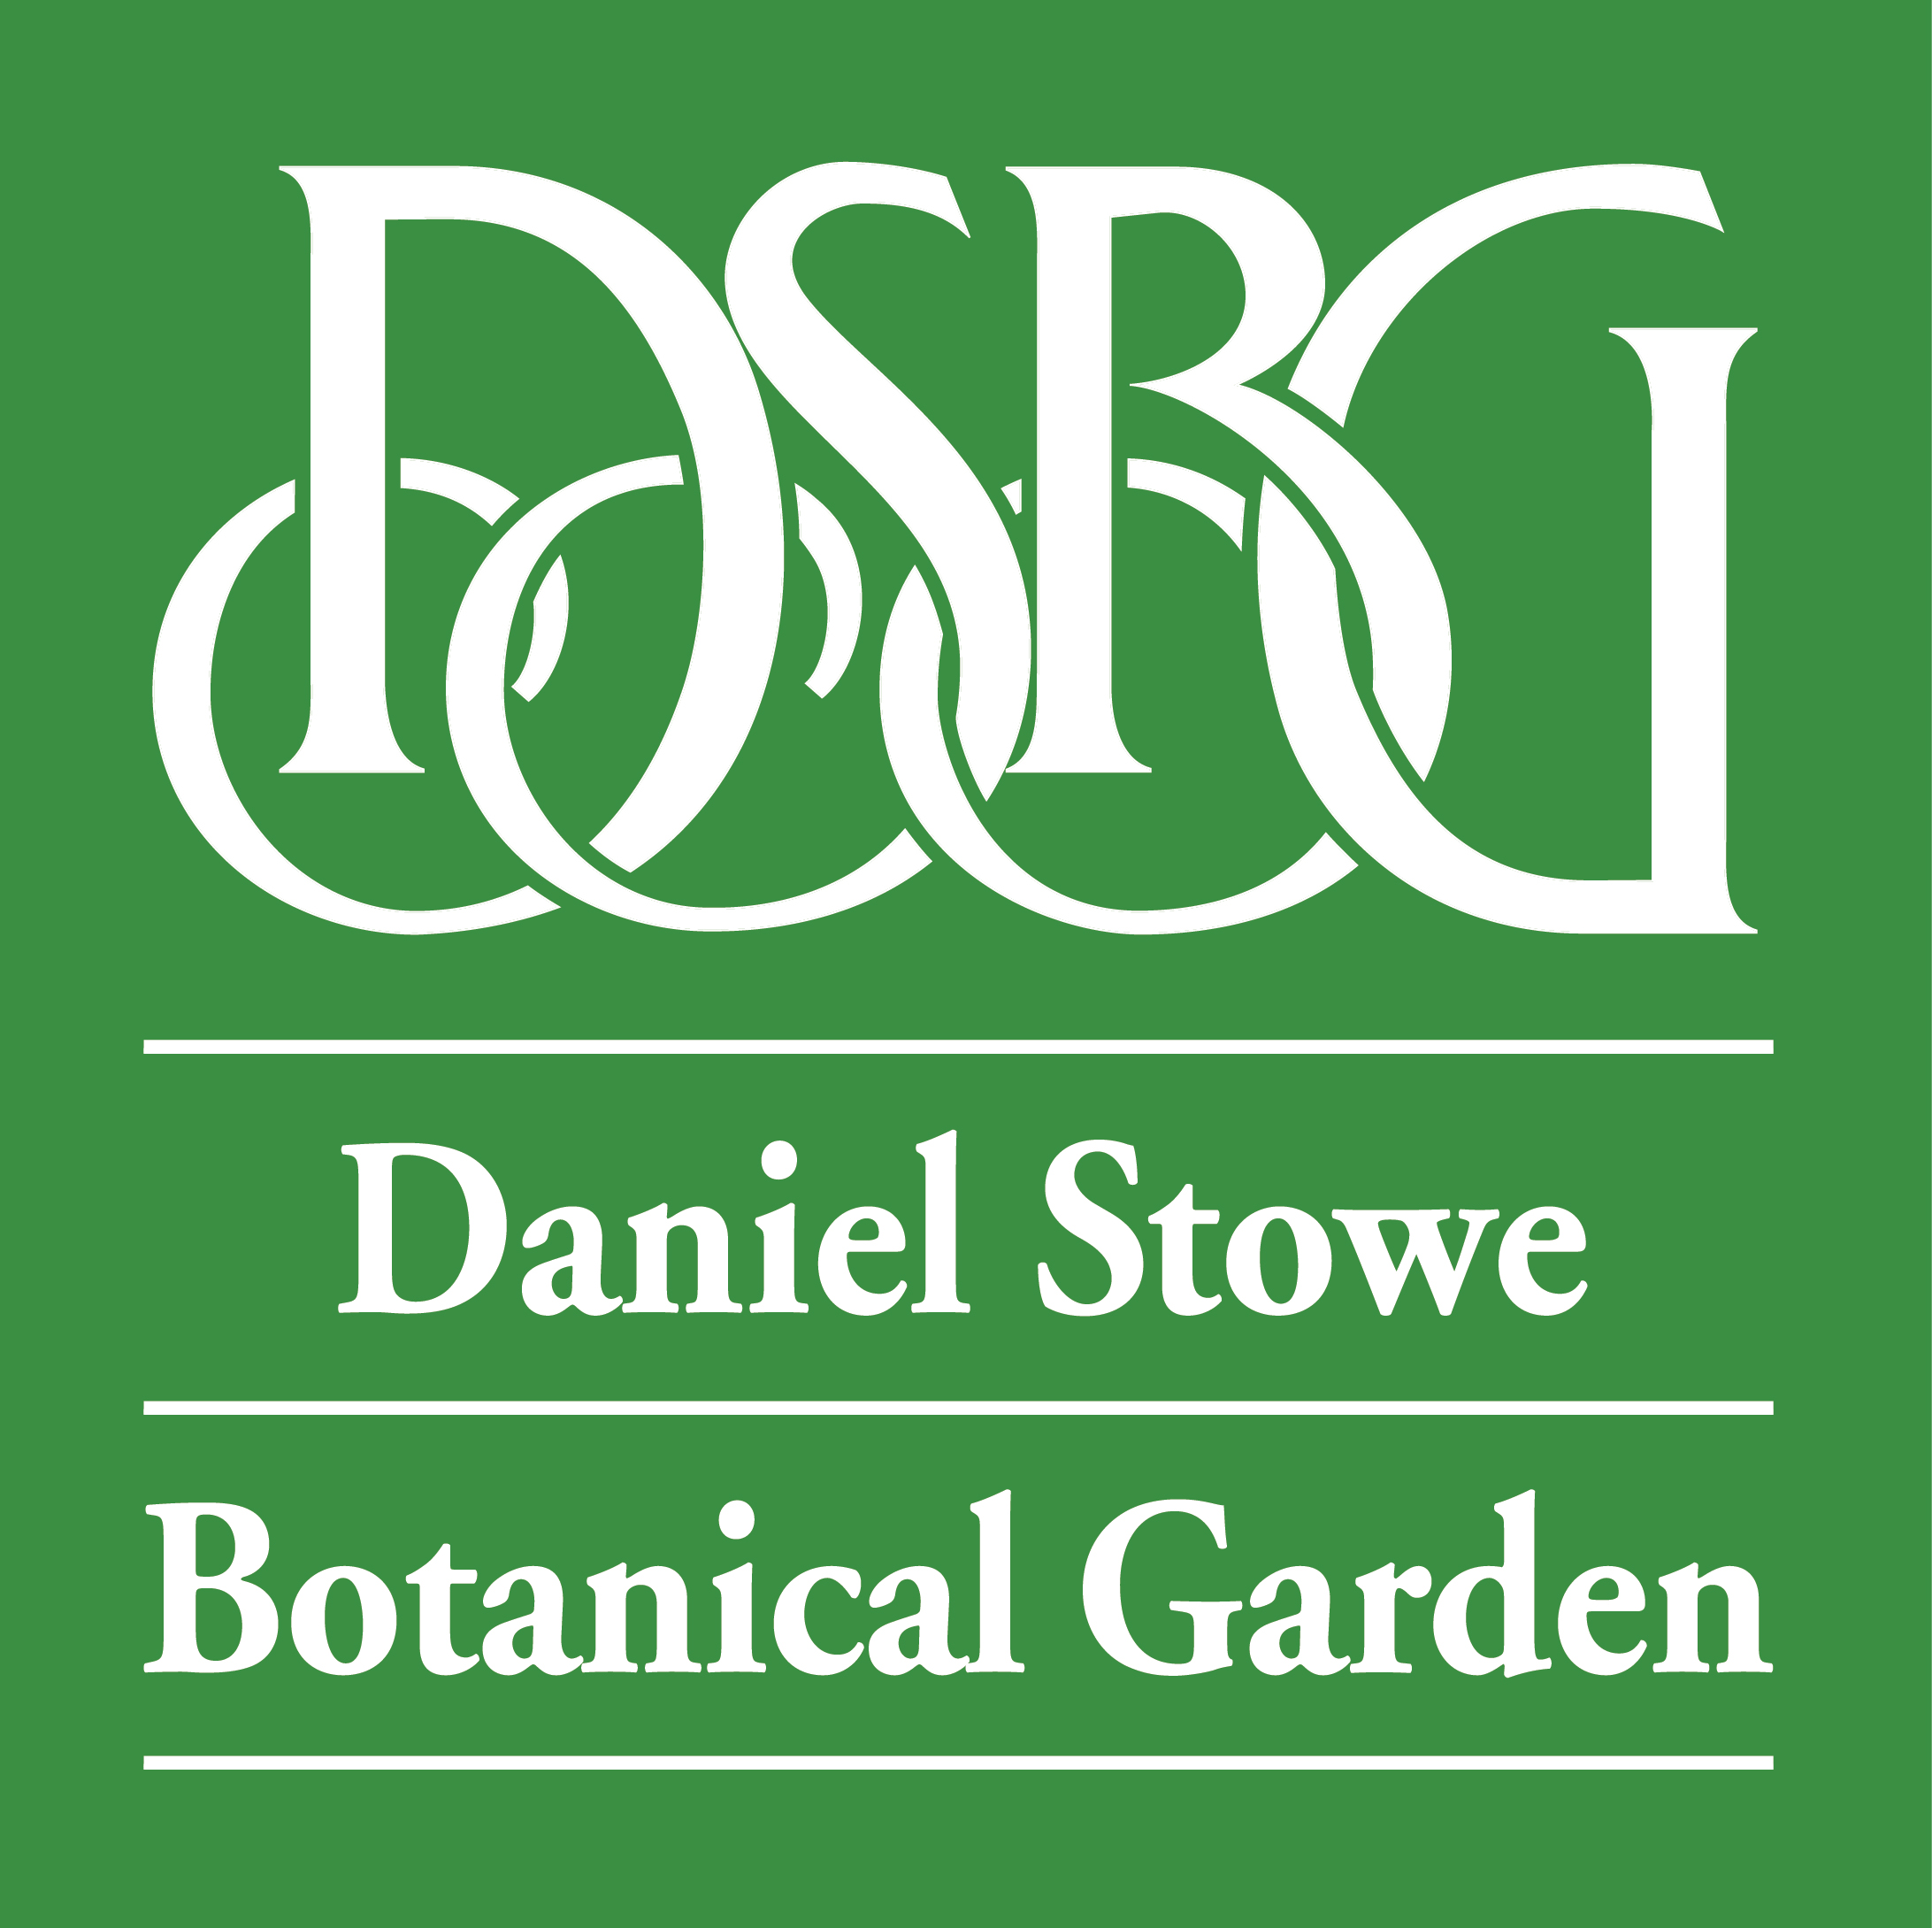 An interlocking D, S, B, & G in a script font with the text Daniel Stowe Botanical Garden in white on a green background.